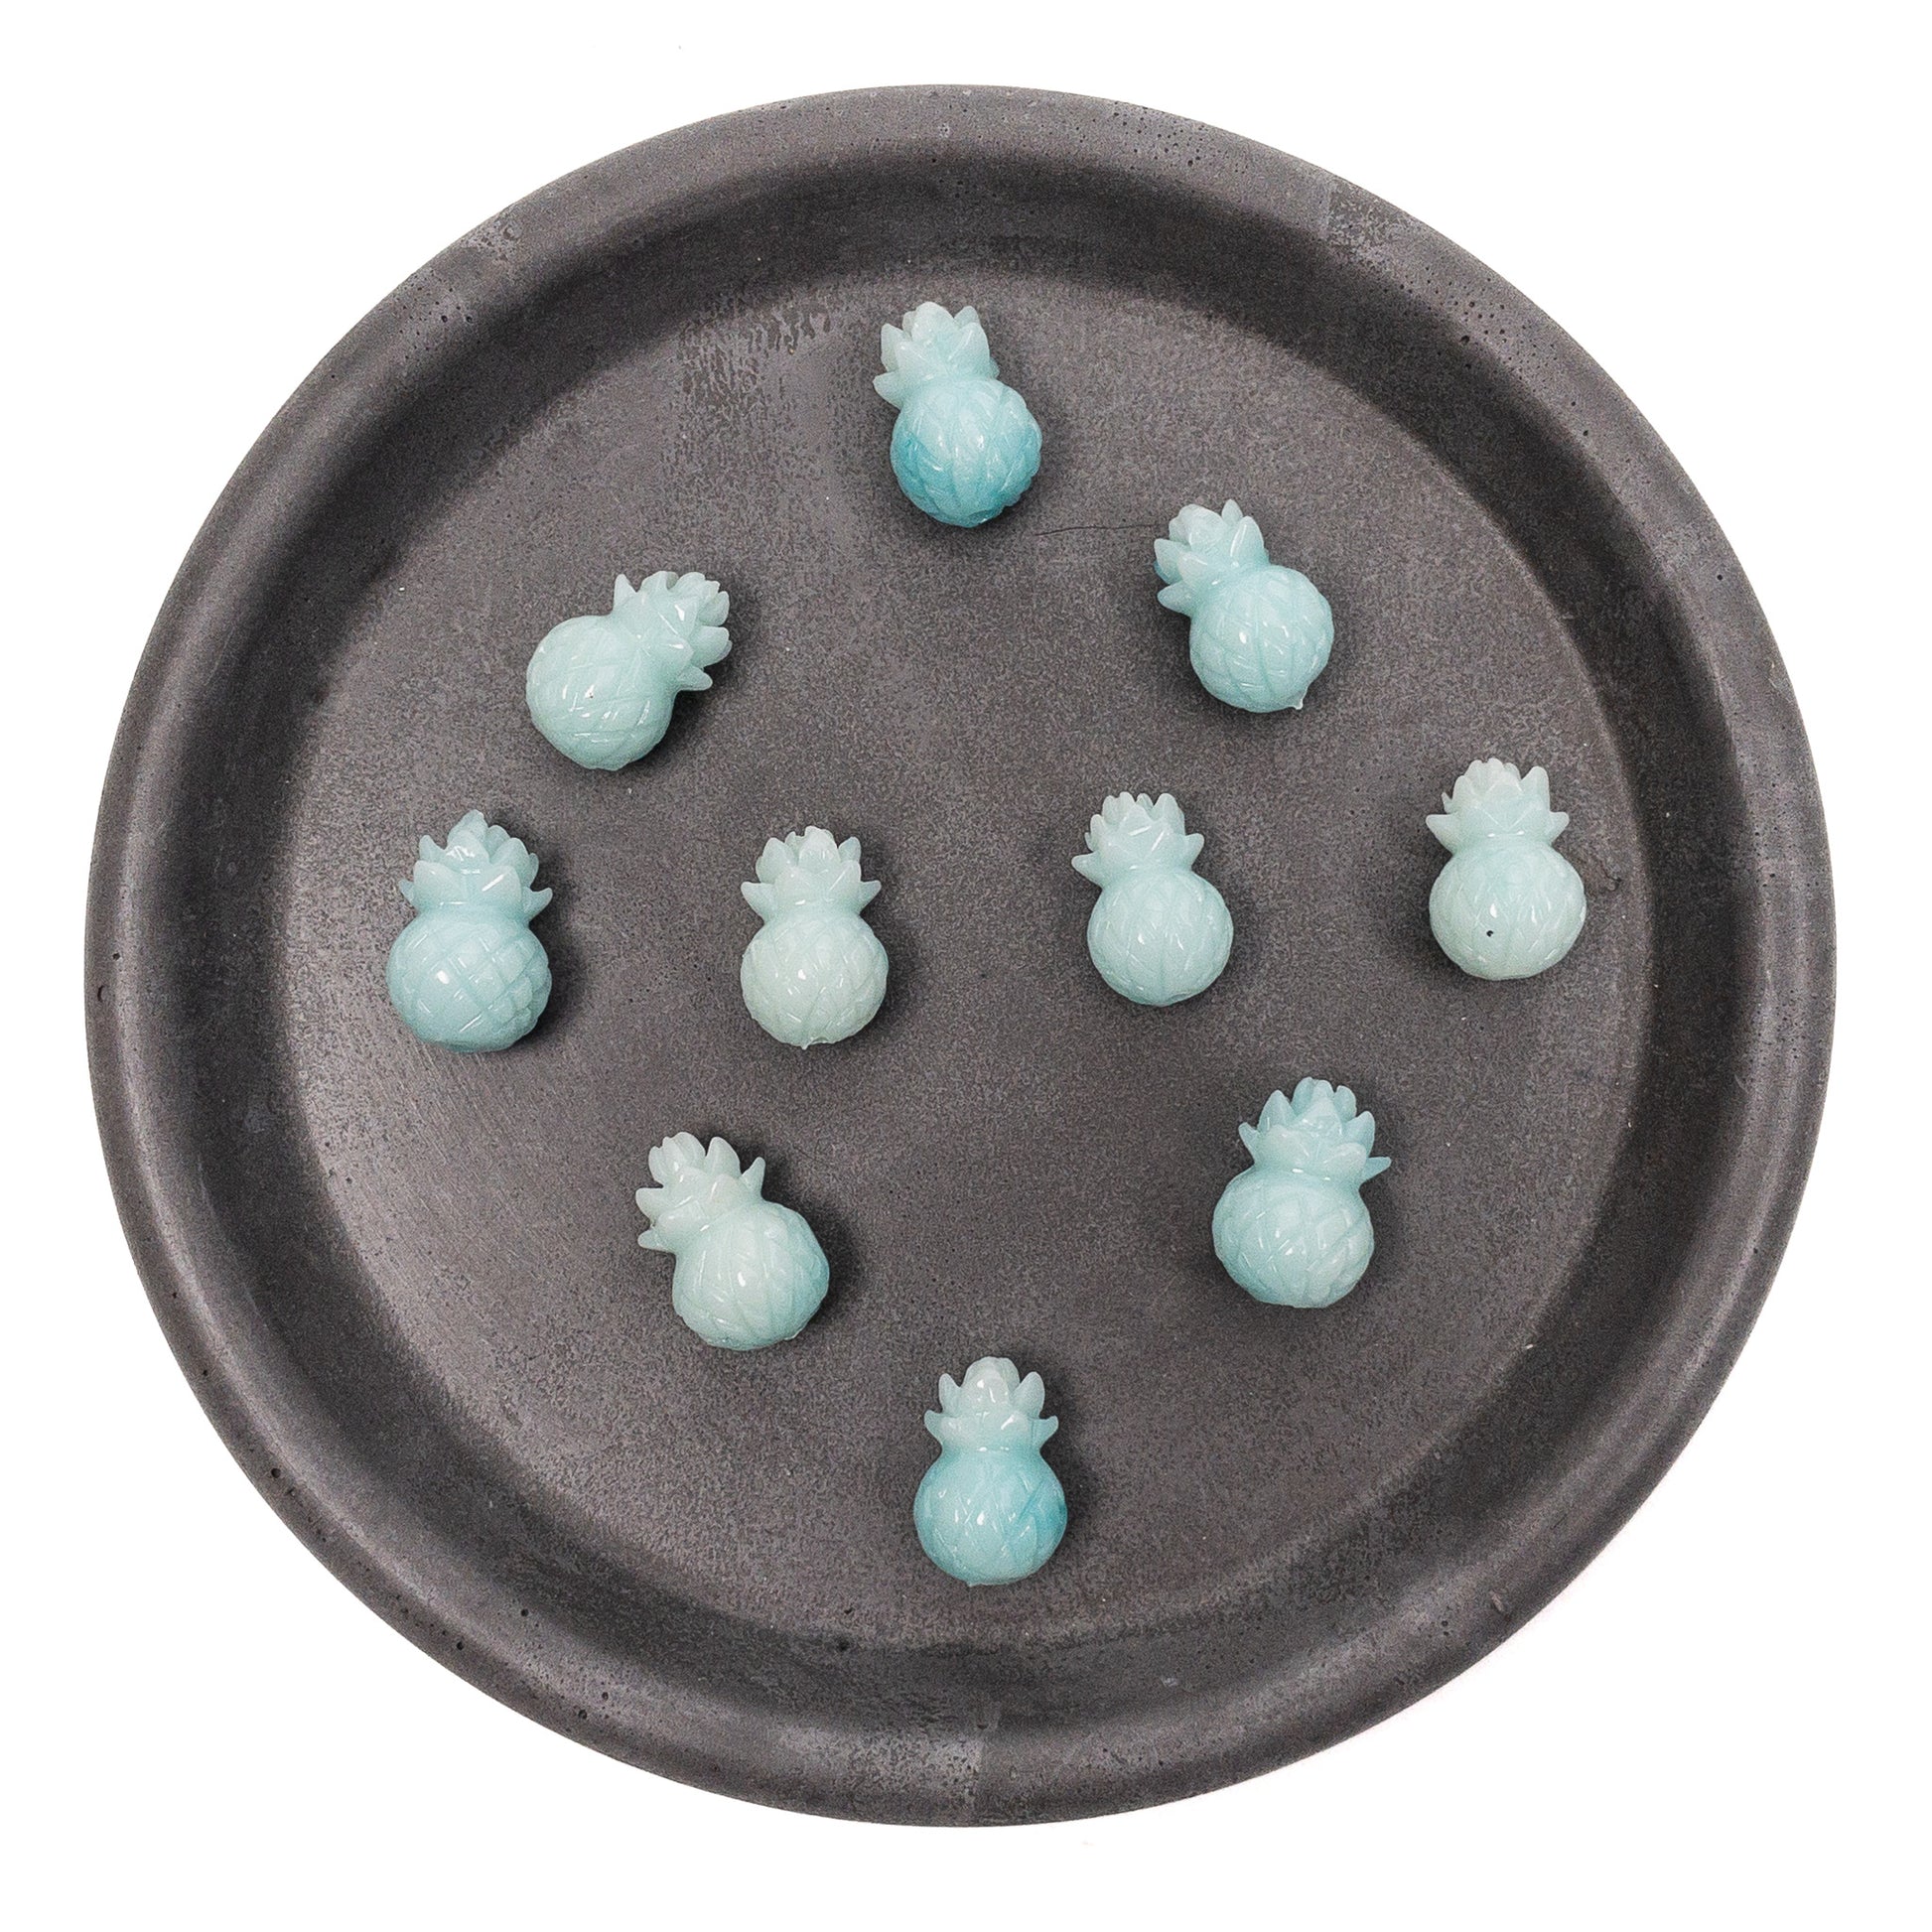 Resin Pineapple Bead (2 Colors Available) - 10 pcs.